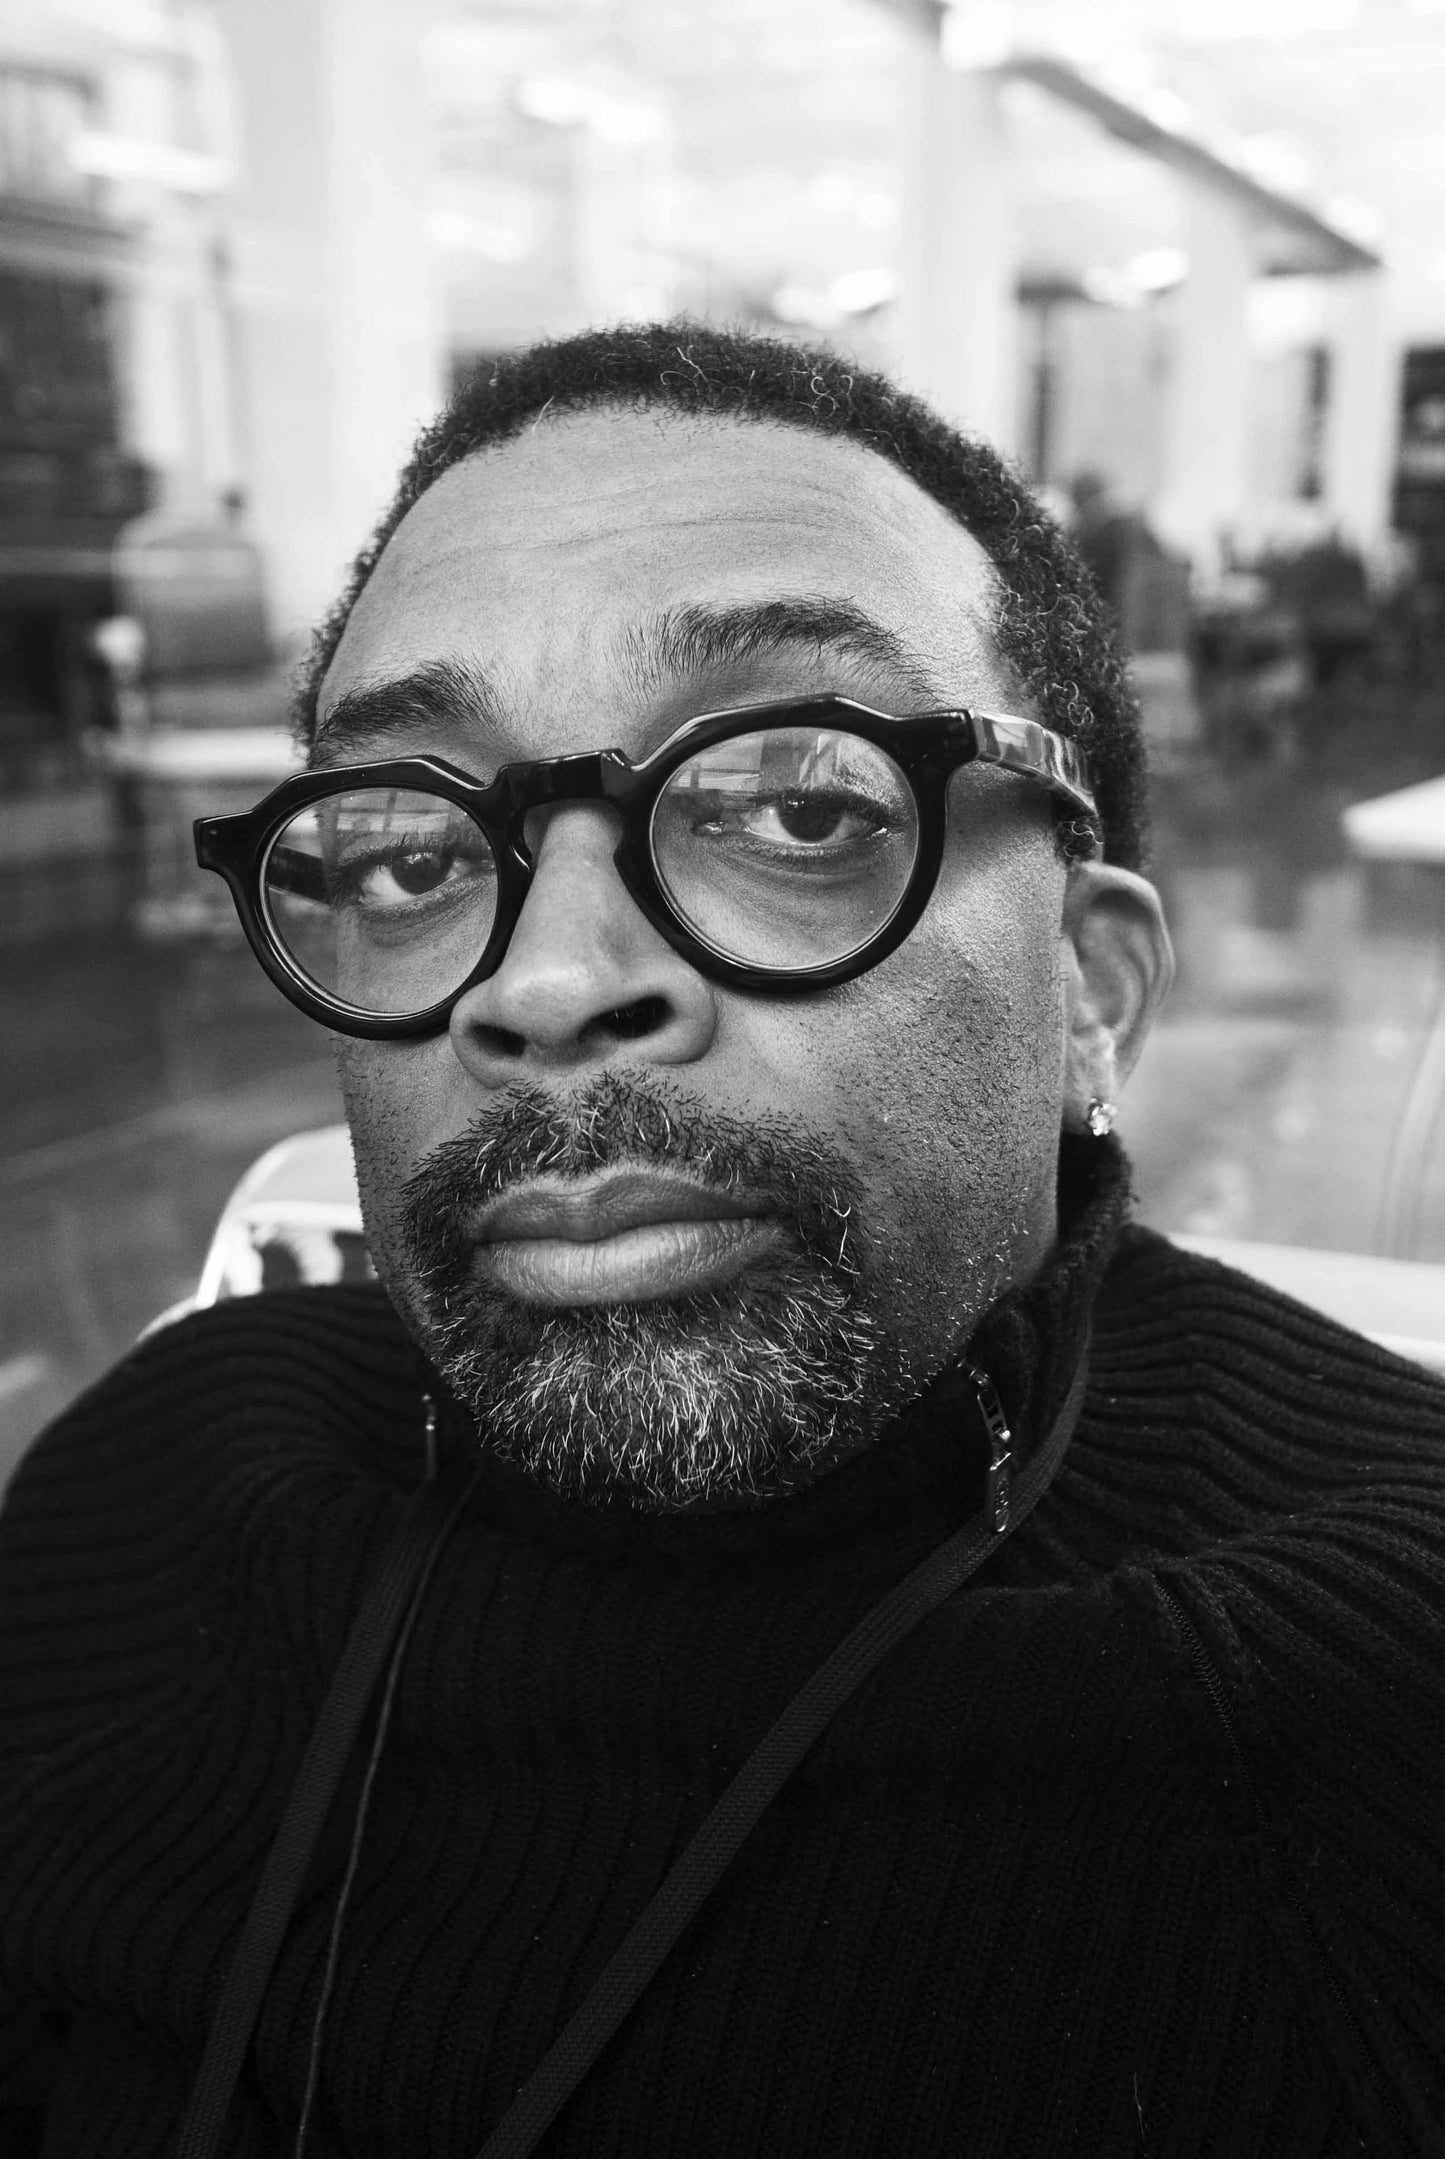 Alessandra Mattanza | I HAD A HOPE, Spike Lee, New York. Portrait of influential and award winning film maker and actor Spike Lee. Available as an art print or as a photographic print on acrylic glass.